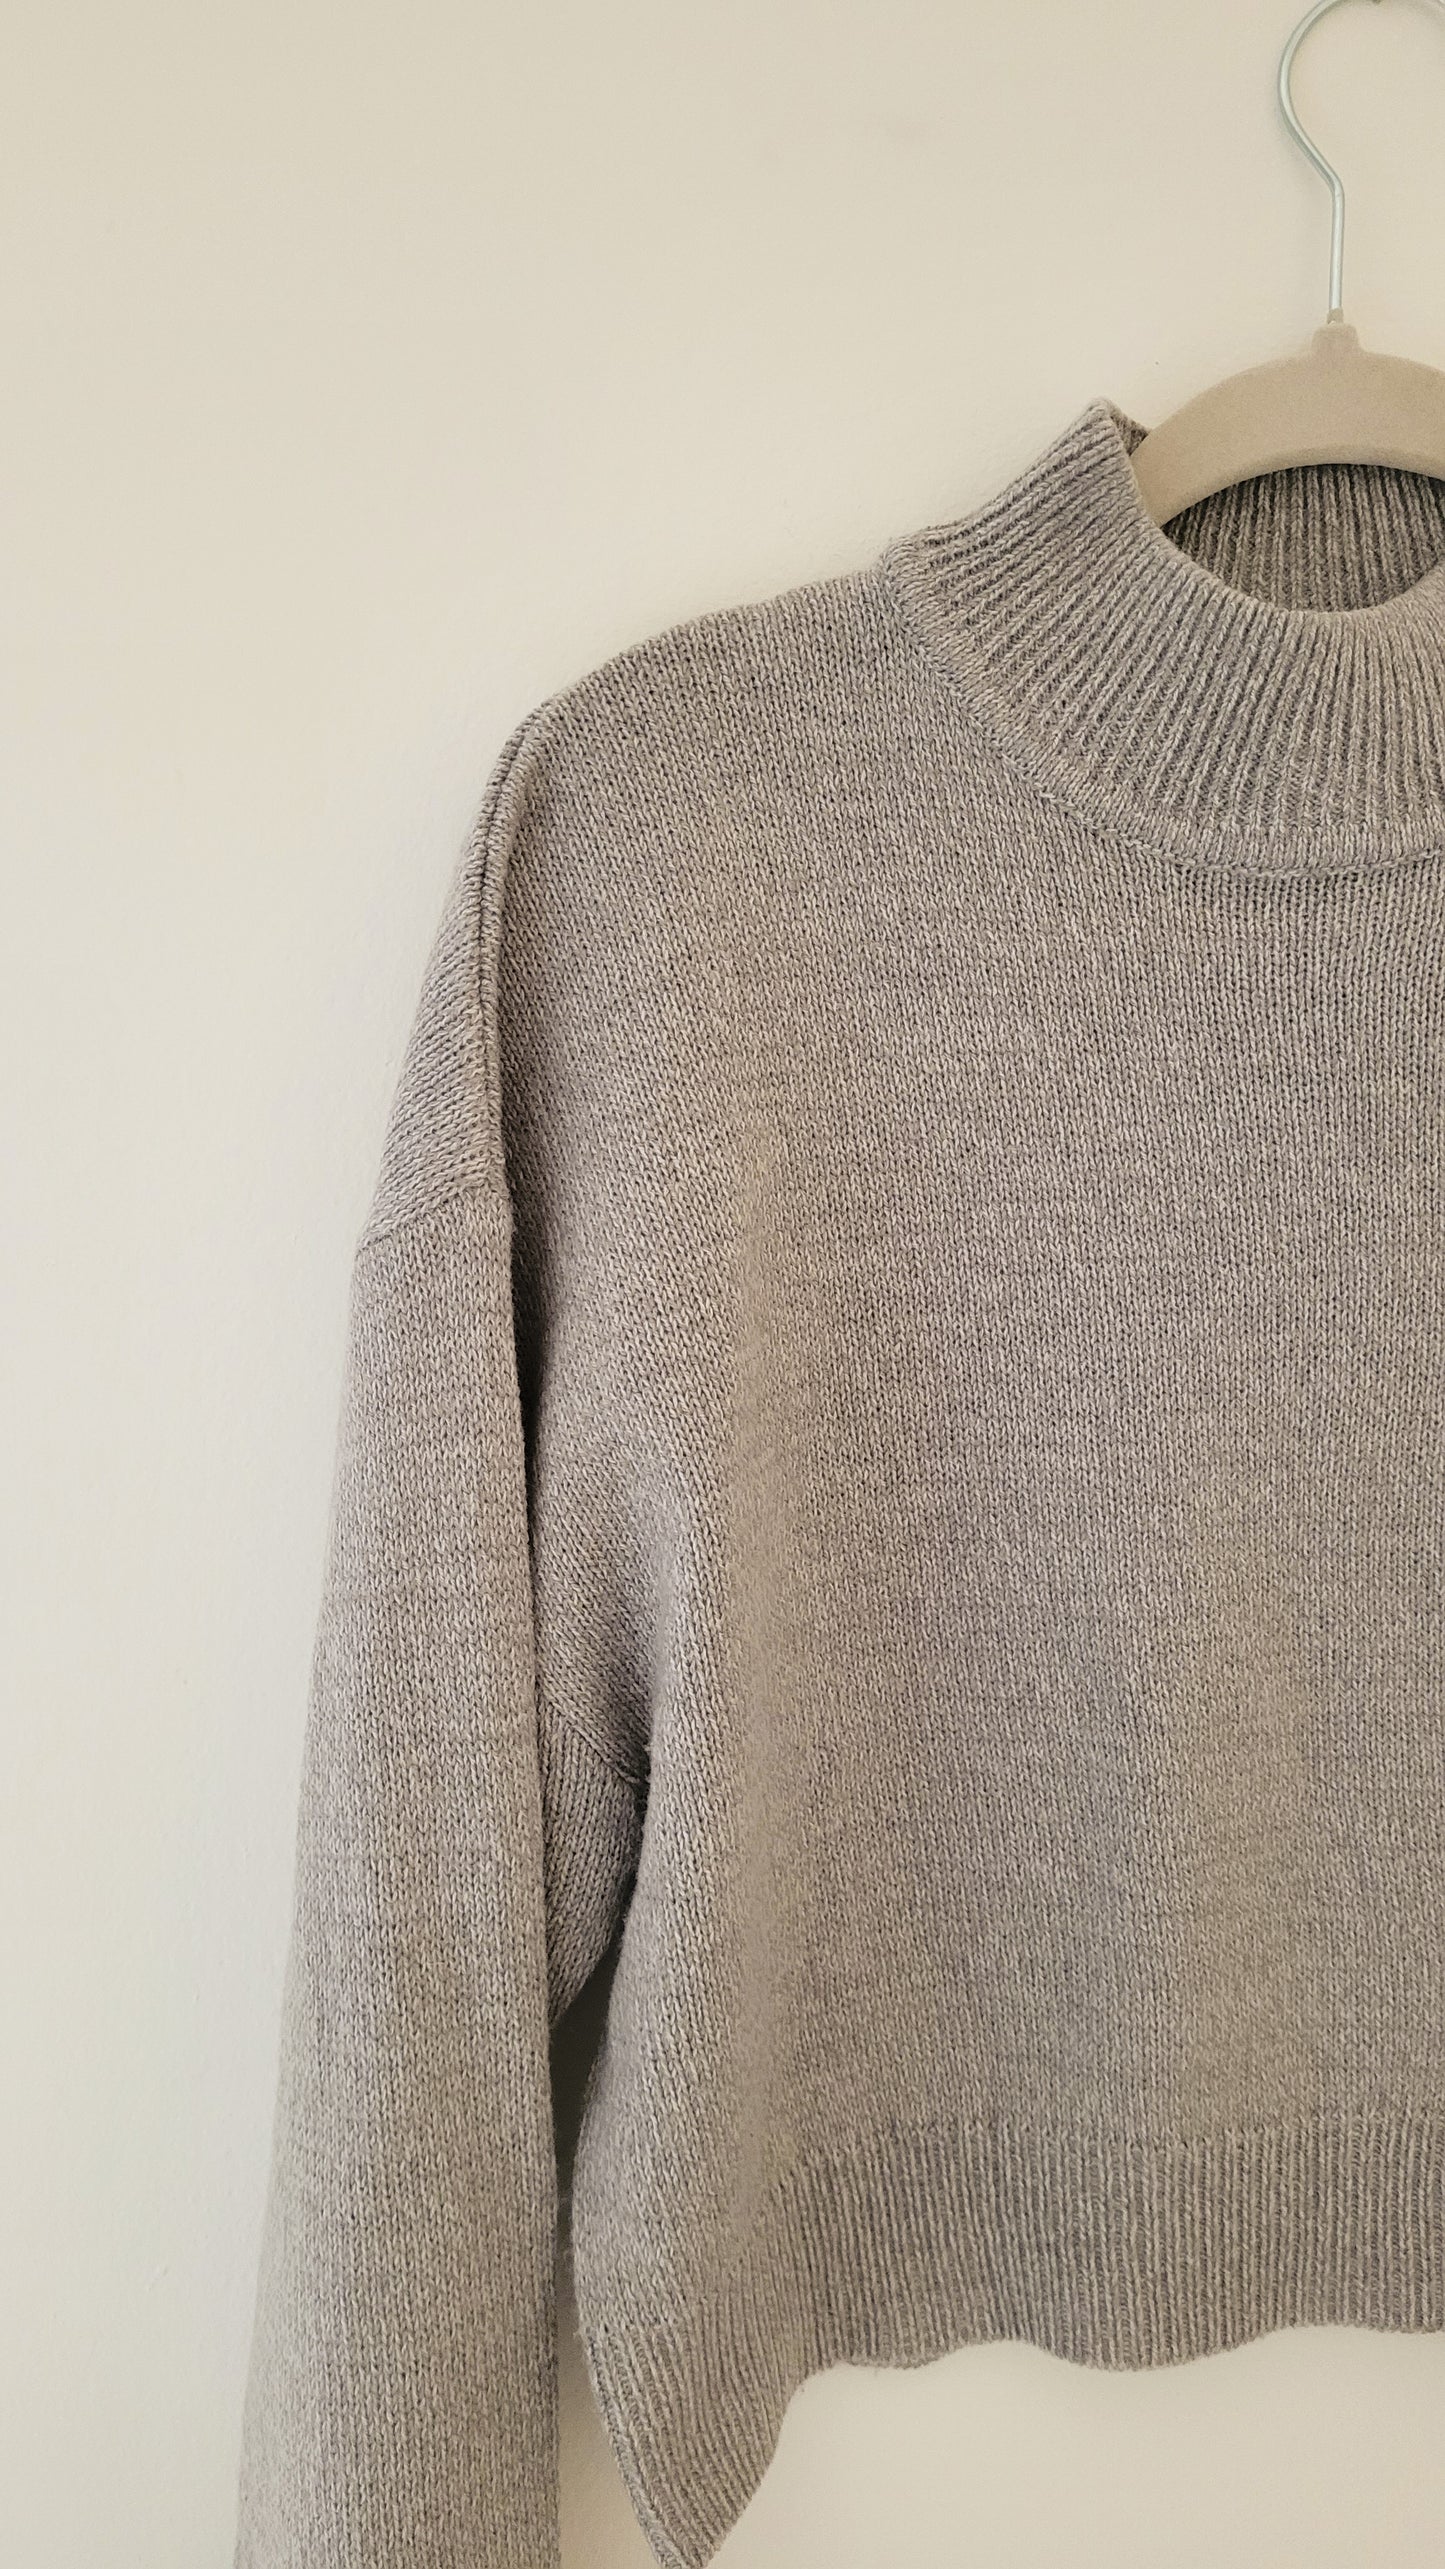 Cropped Mock Neck Sweater | Small | H&M | oct drop